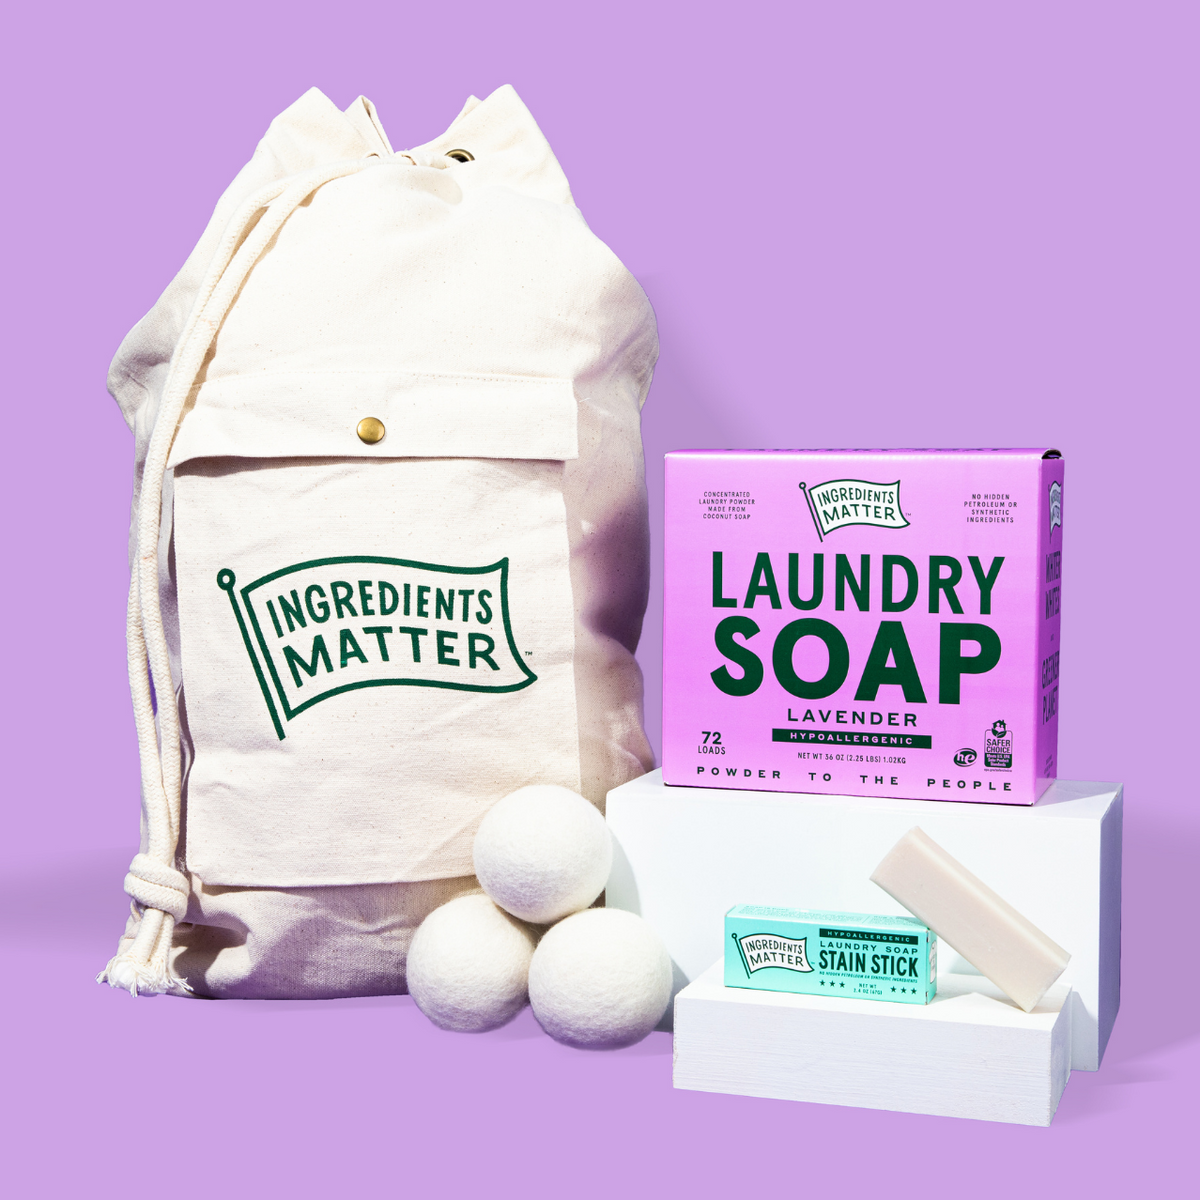 Lavender scented laundry bundle with laundry soap, stain removing stick, and bag